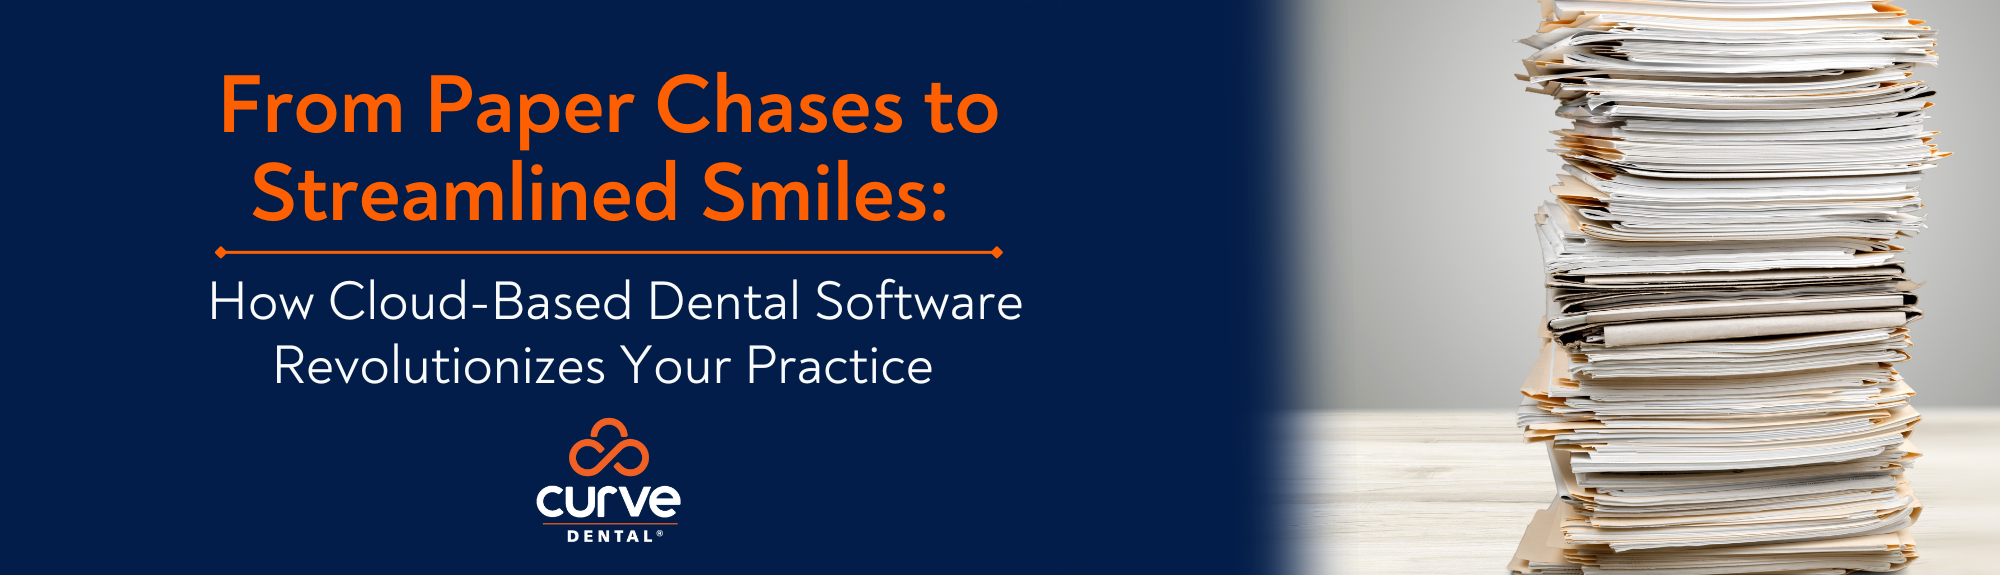 From Paper Chases to Streamlined Smiles: How Cloud-Based Dental Software Revolutionizes Patient Charting & EHRs